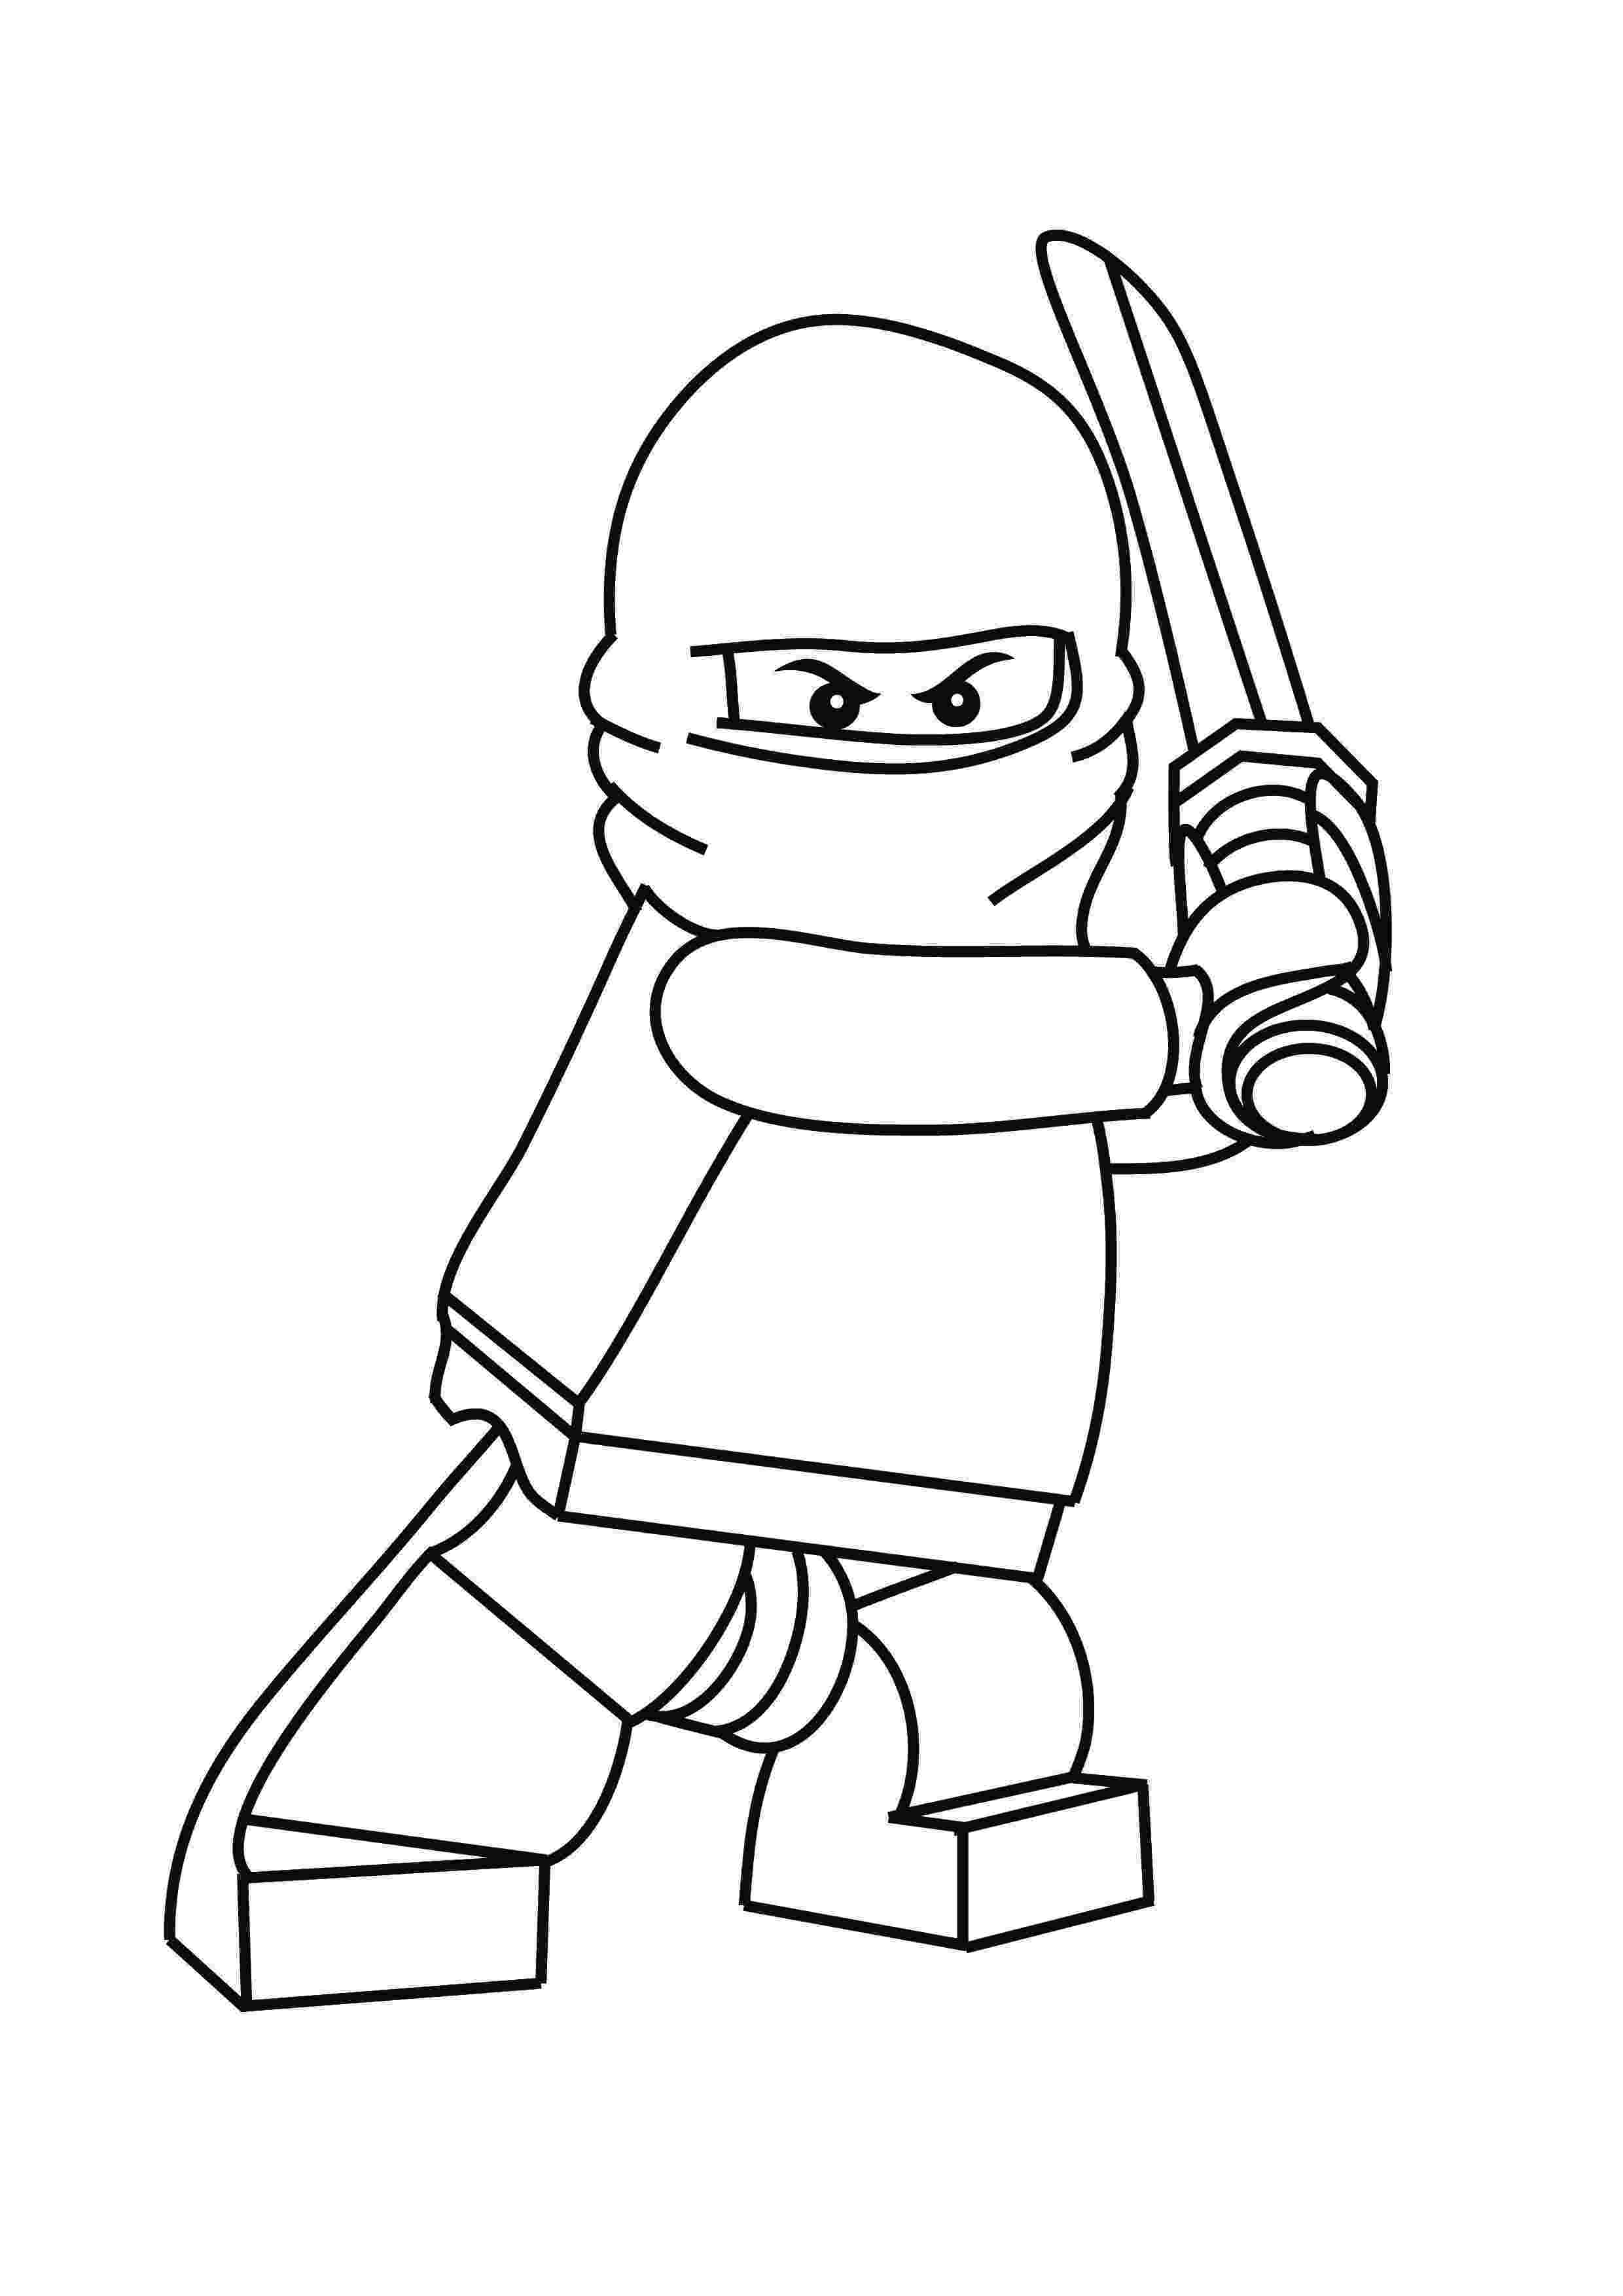 lego colouring sheet free printable lego coloring pages paper trail design sheet colouring lego 